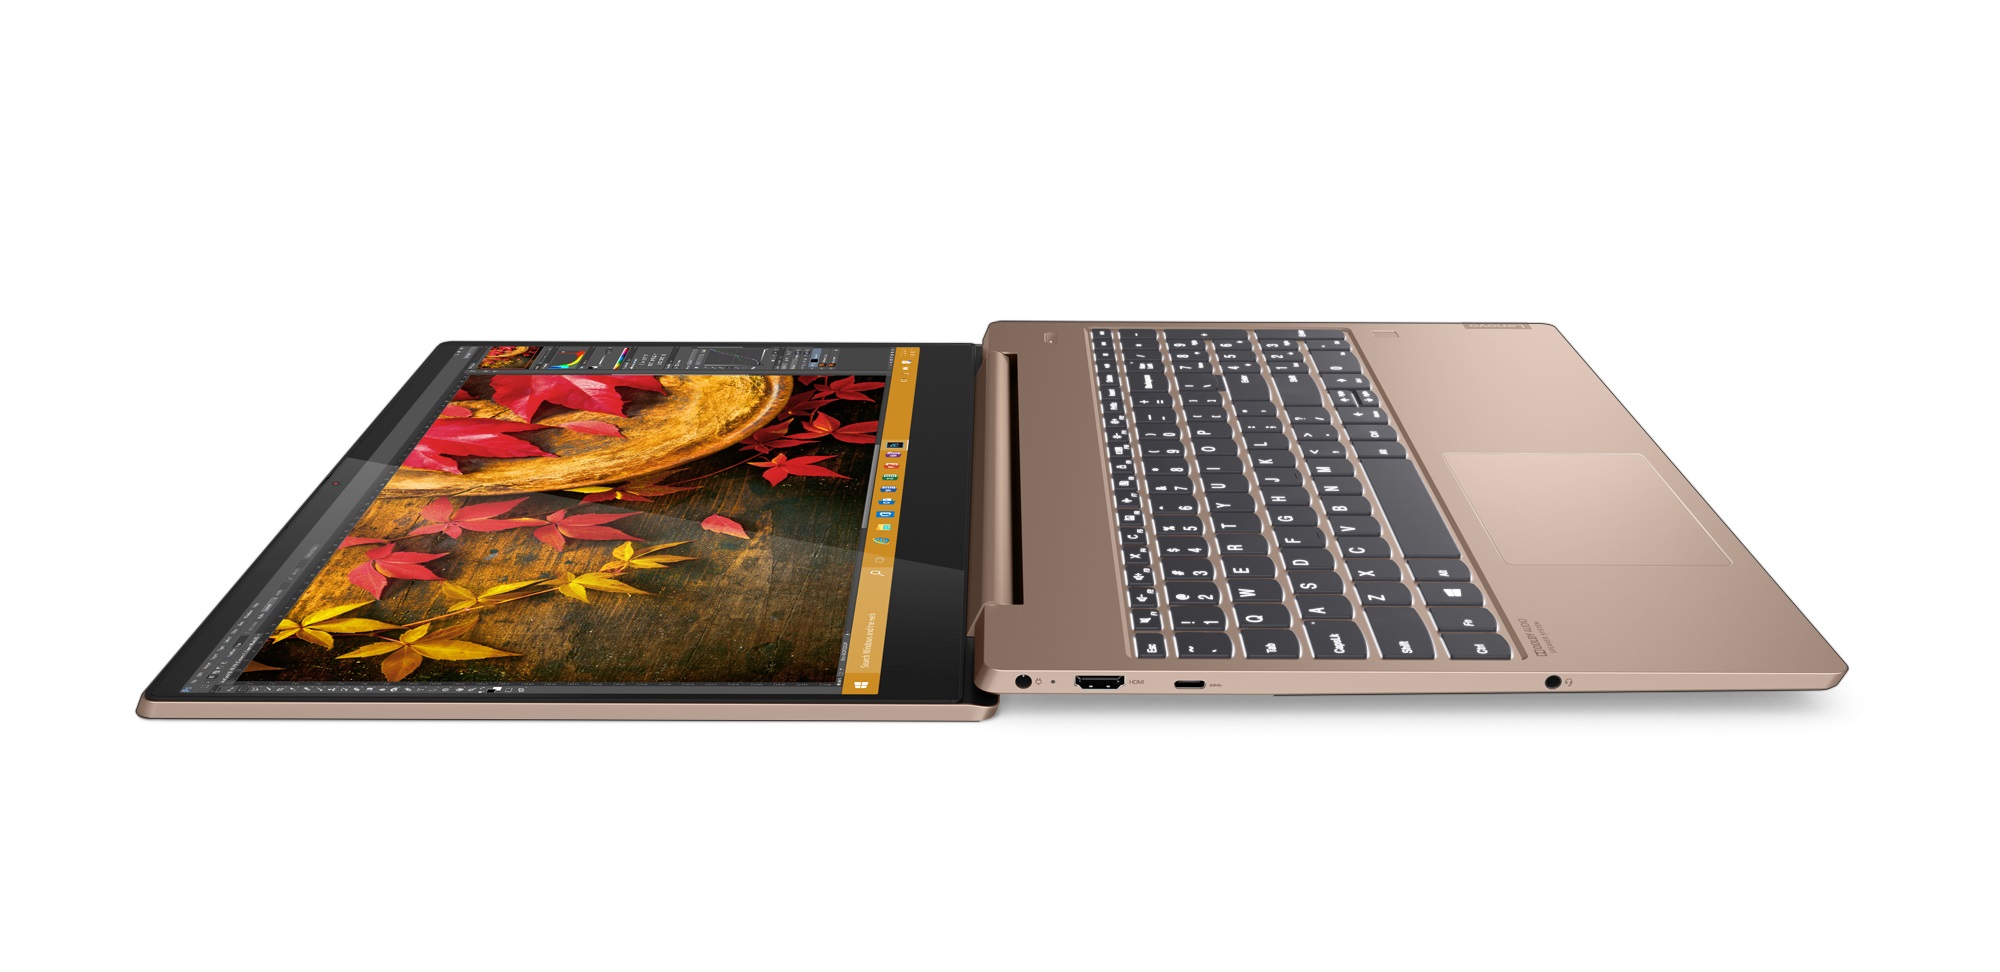 IdeaPad S540 in Copper, open and lying flat